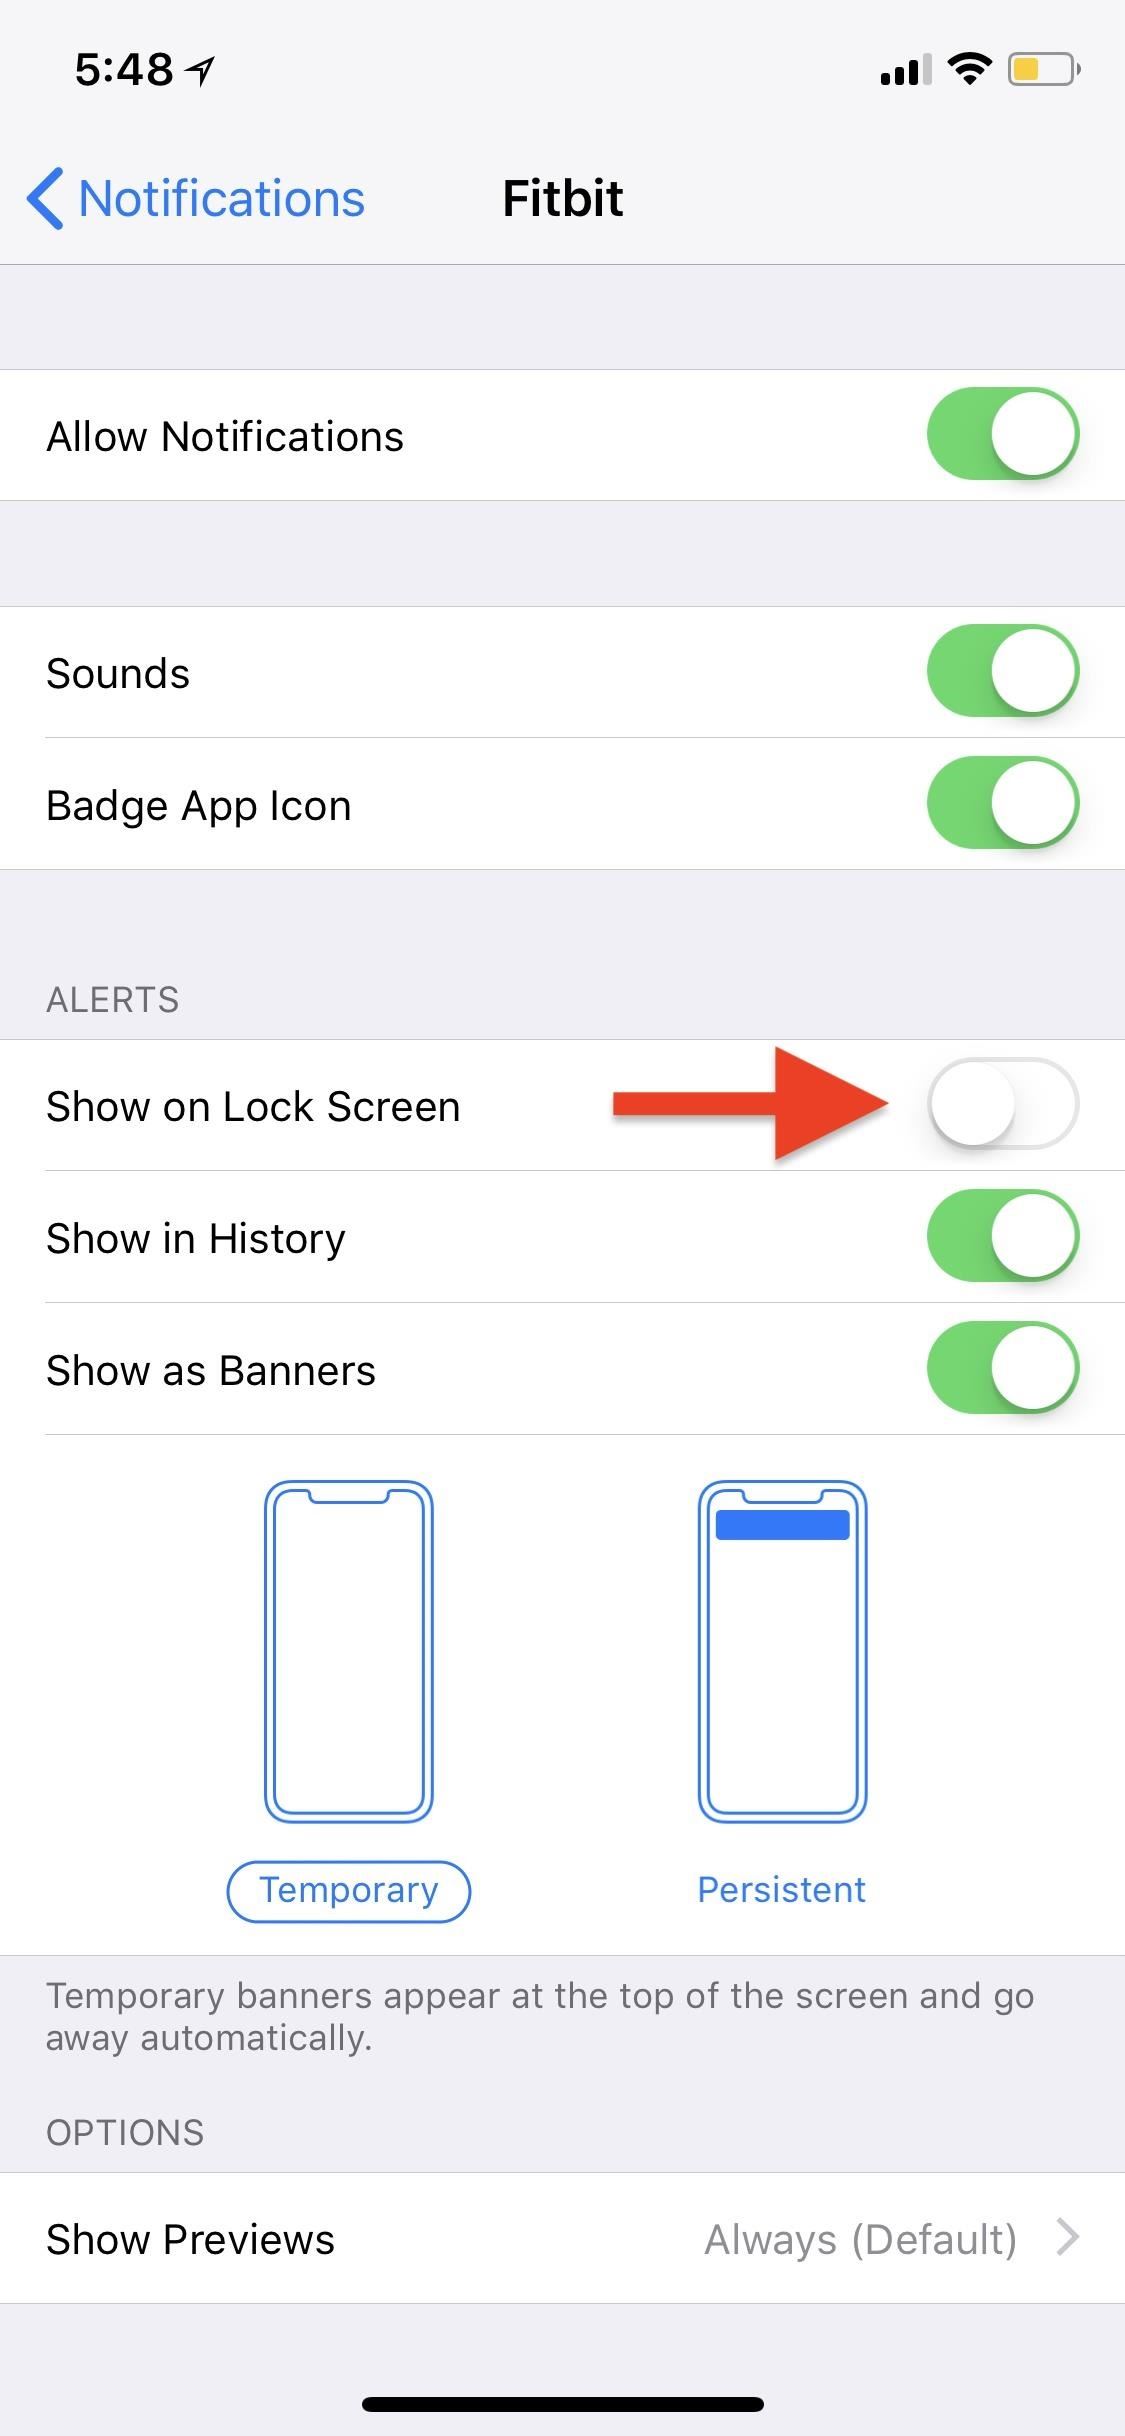 How to Keep Your iPhone's Screen from Randomly Turning On